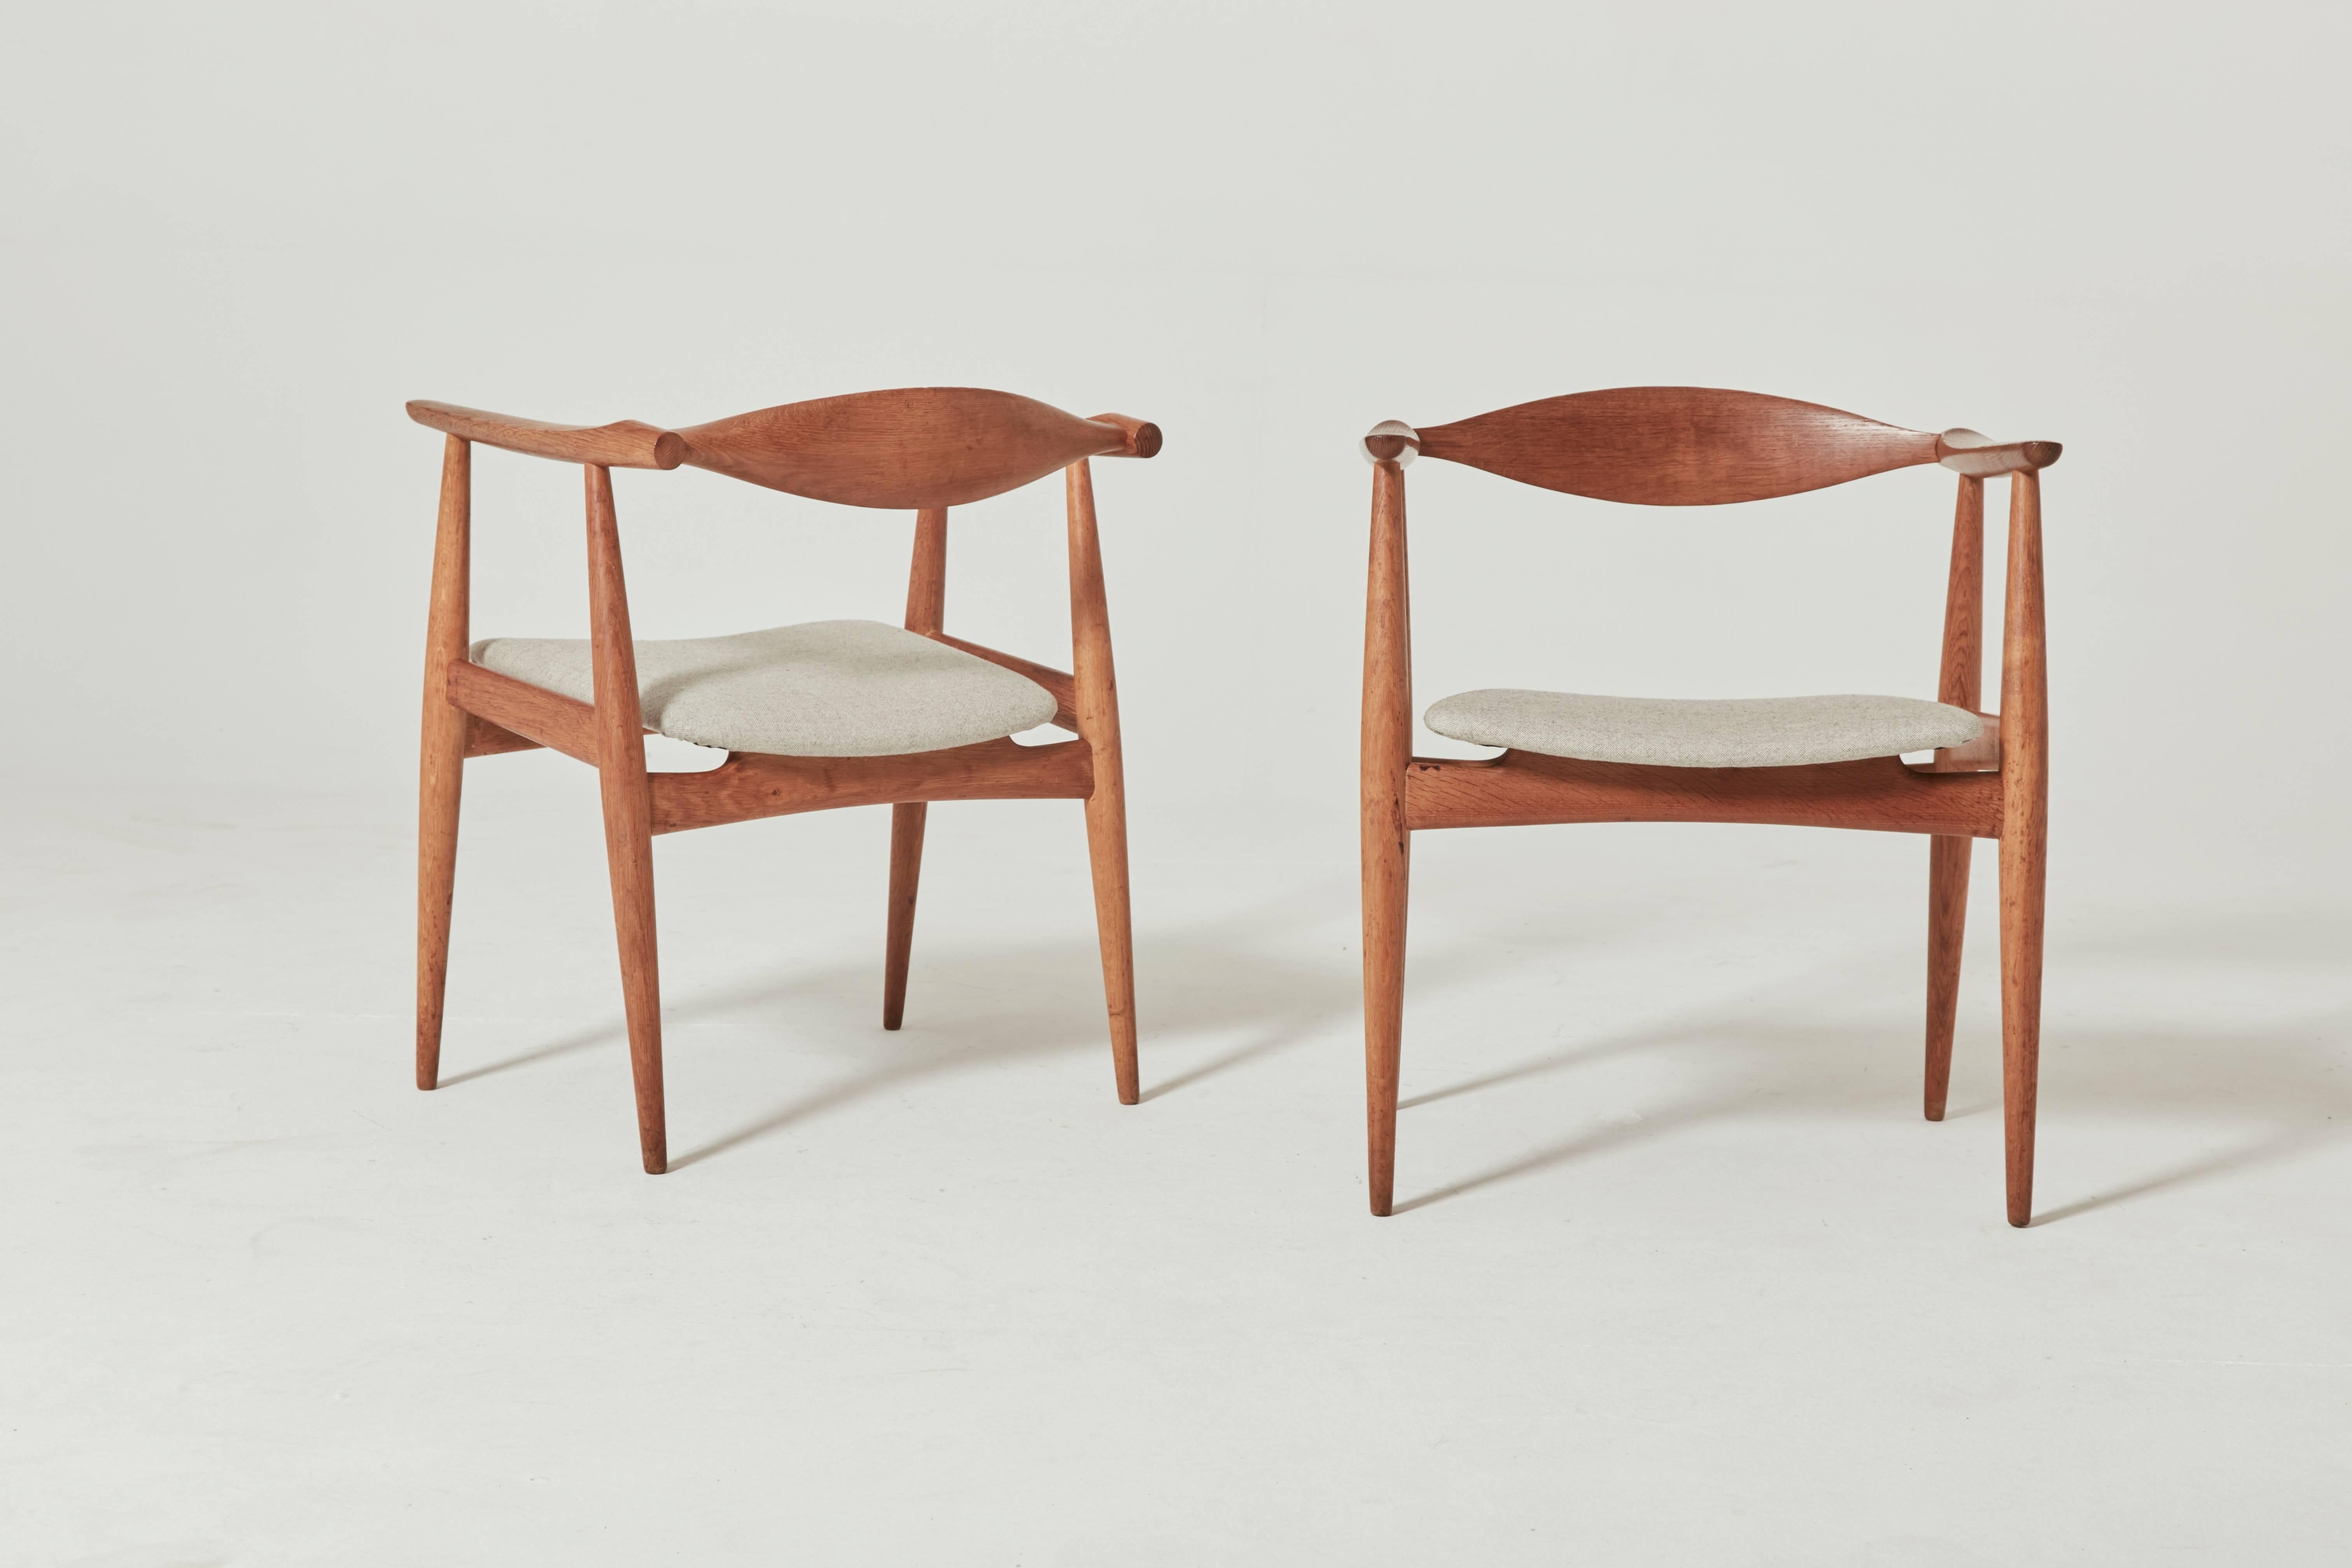 Hans Wegner CH-35 dining or desk chairs. Made by Carl Hansen & Son, Denmark, 1960s. Oak frames and Kvadrat wool fabric seats. Signed and branded with manufacturers mark to underside. Ships worldwide - please contact us for options.

